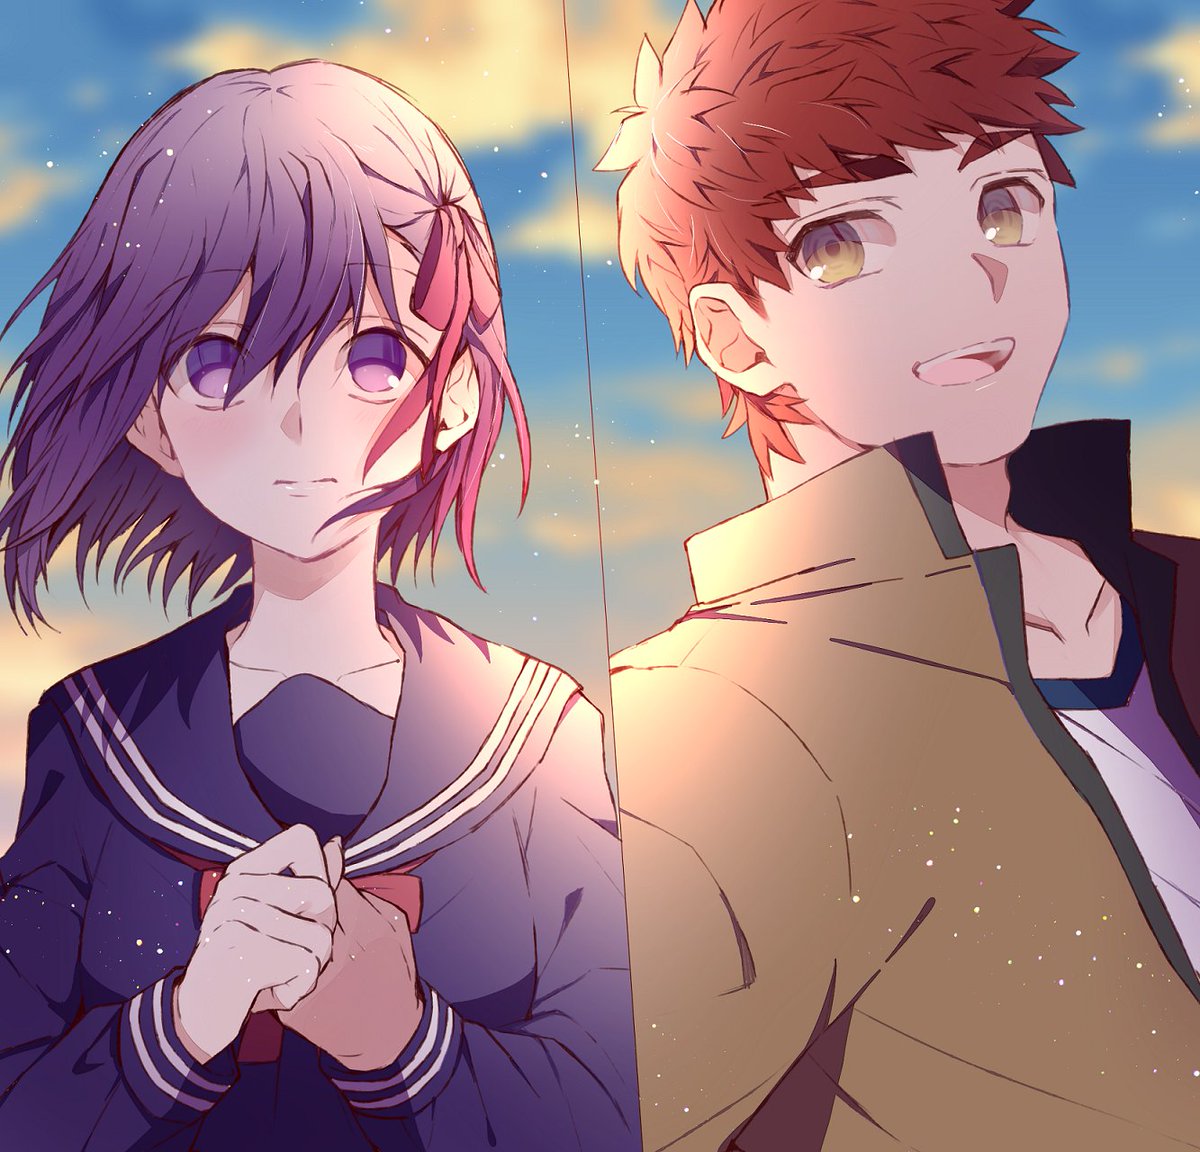 The day that Sakura fells in love with Shirou Source: https://t.co/jsOZOouu...